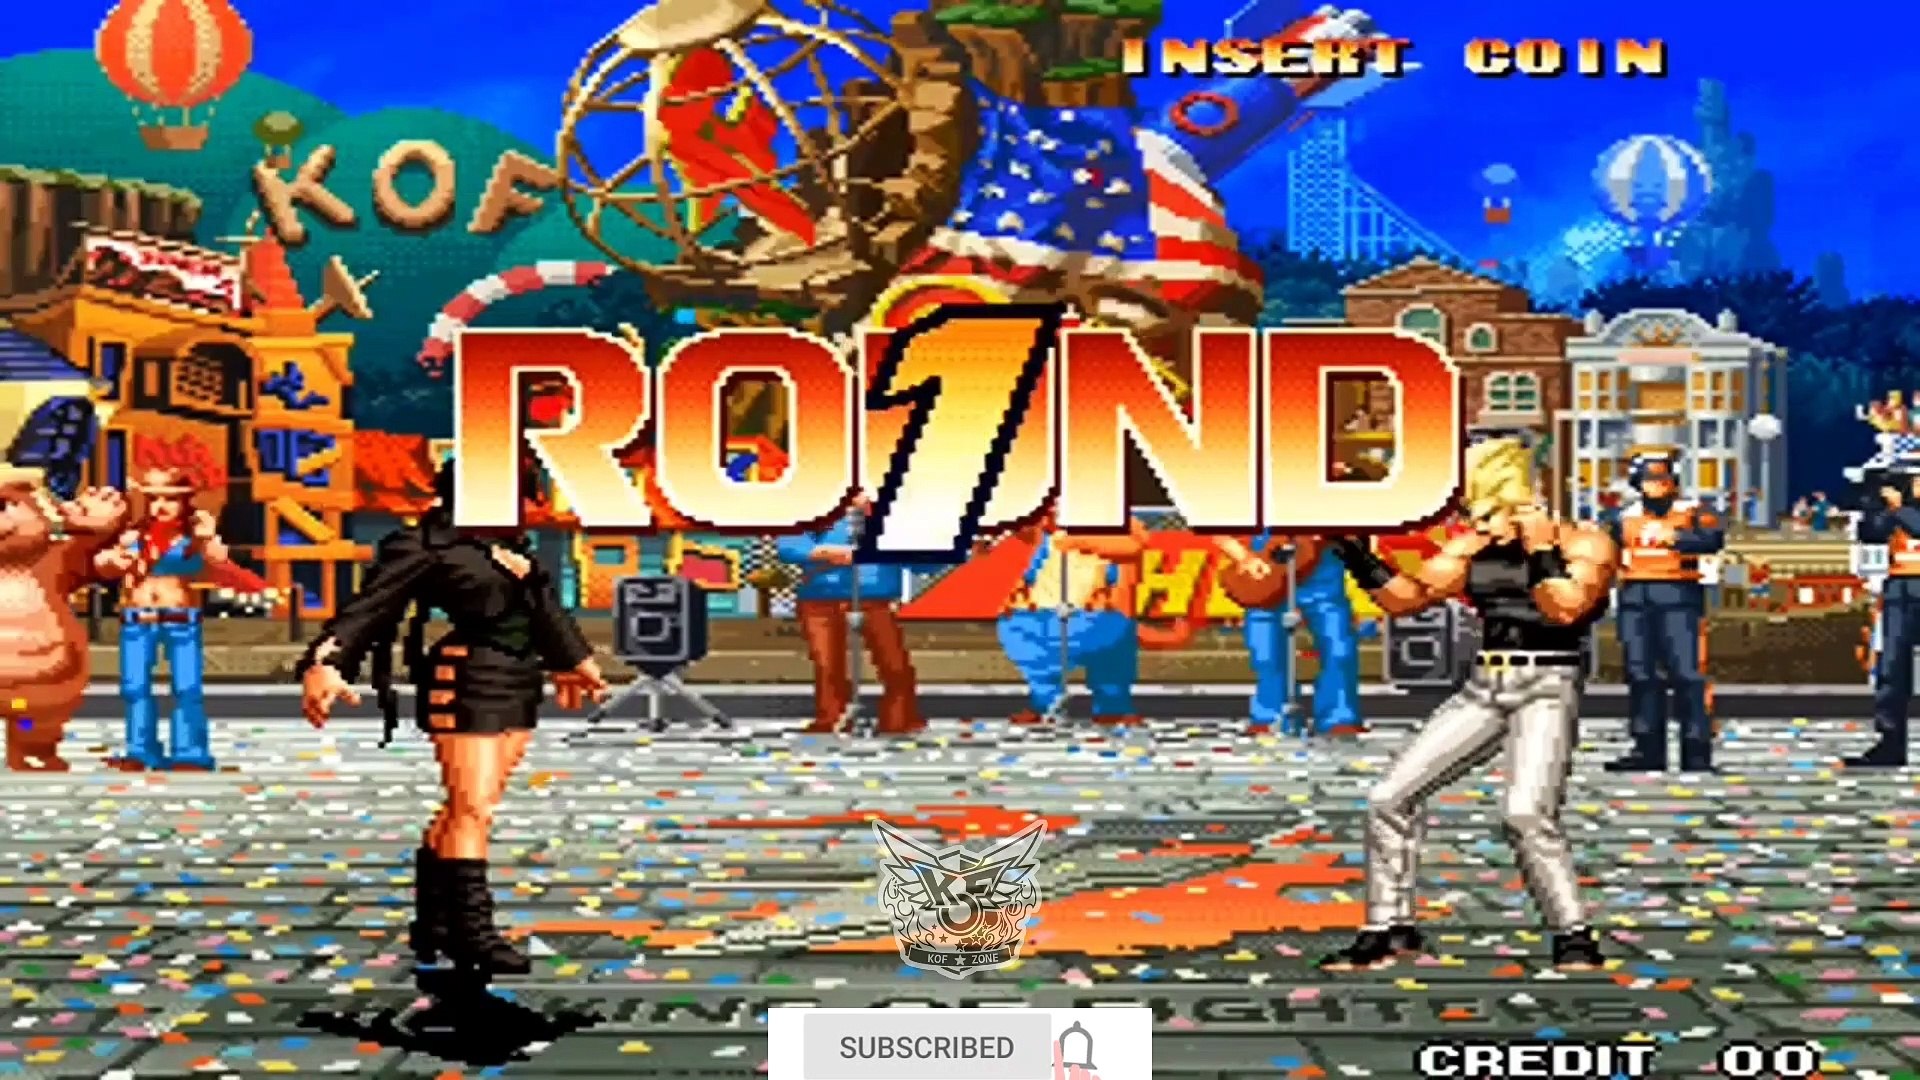 The King of Fighters '97 Global Match trailer #1 - video Dailymotion